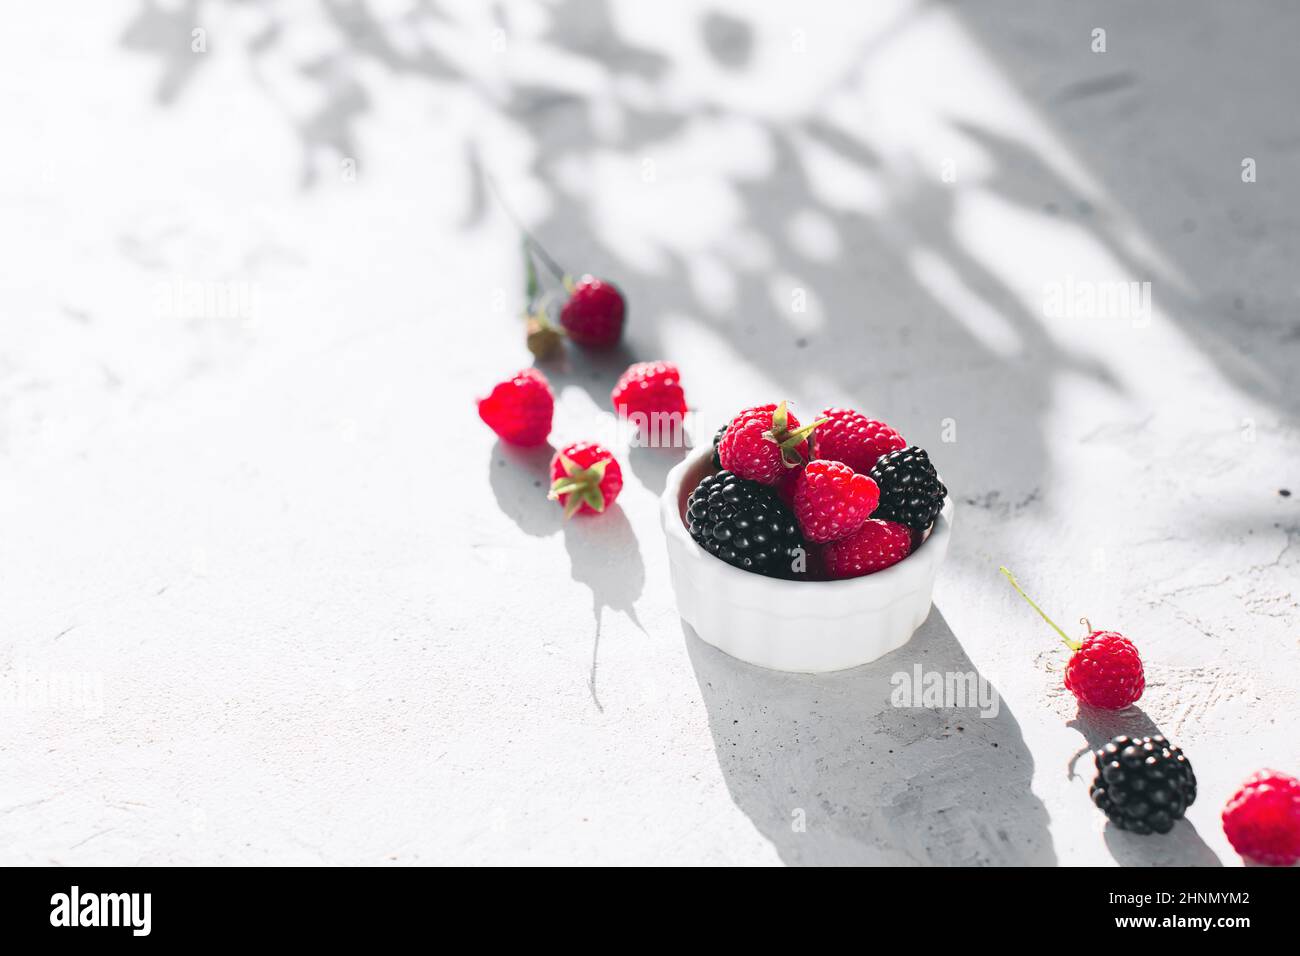 White bowl full with raspberries, blackberry on gray concrete table with leaves, tree branches shadow. Healthy eating concept. Eco, bio farming. Fresh Stock Photo